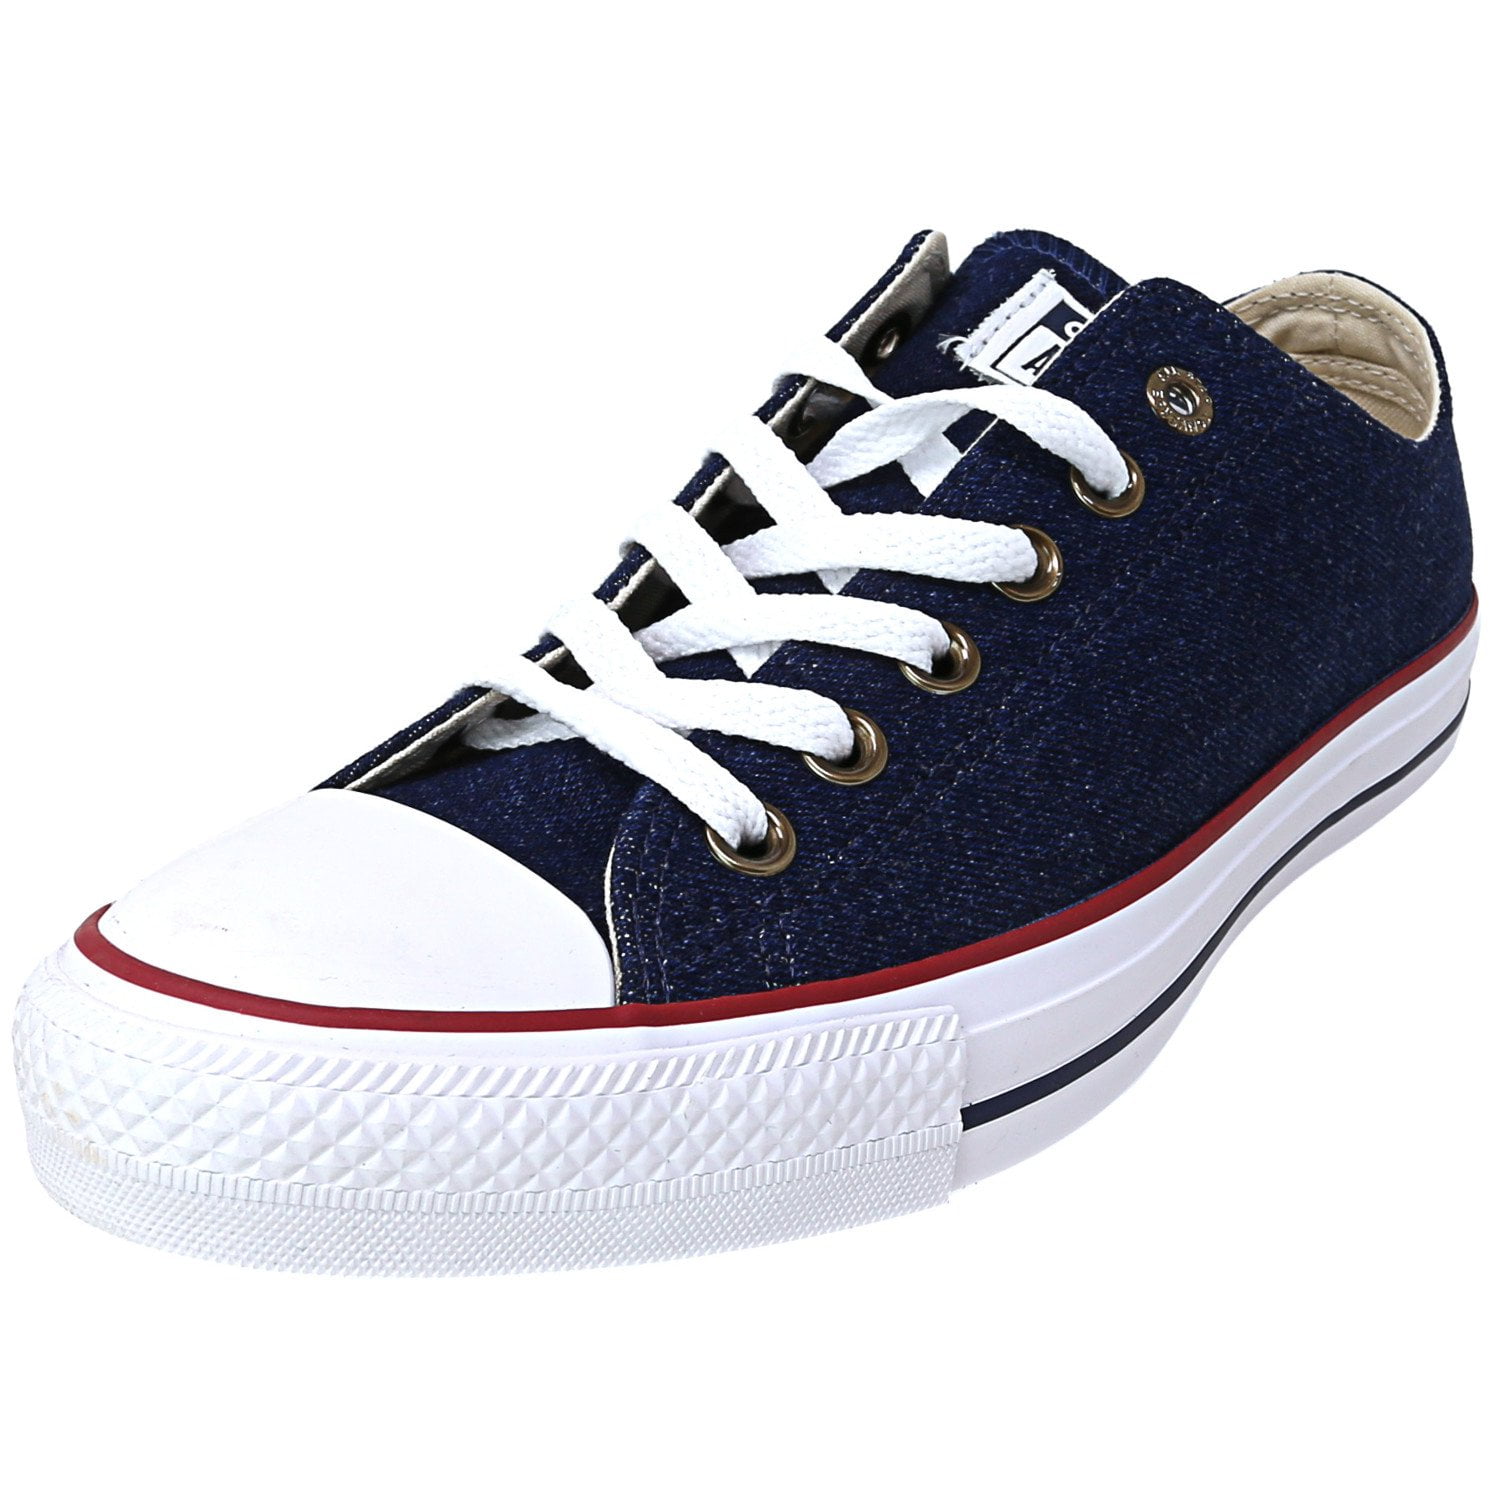 Converse Chuck Taylor All Star Ox Dark Blue / Natural Ivory White  Ankle-High Sneaker   